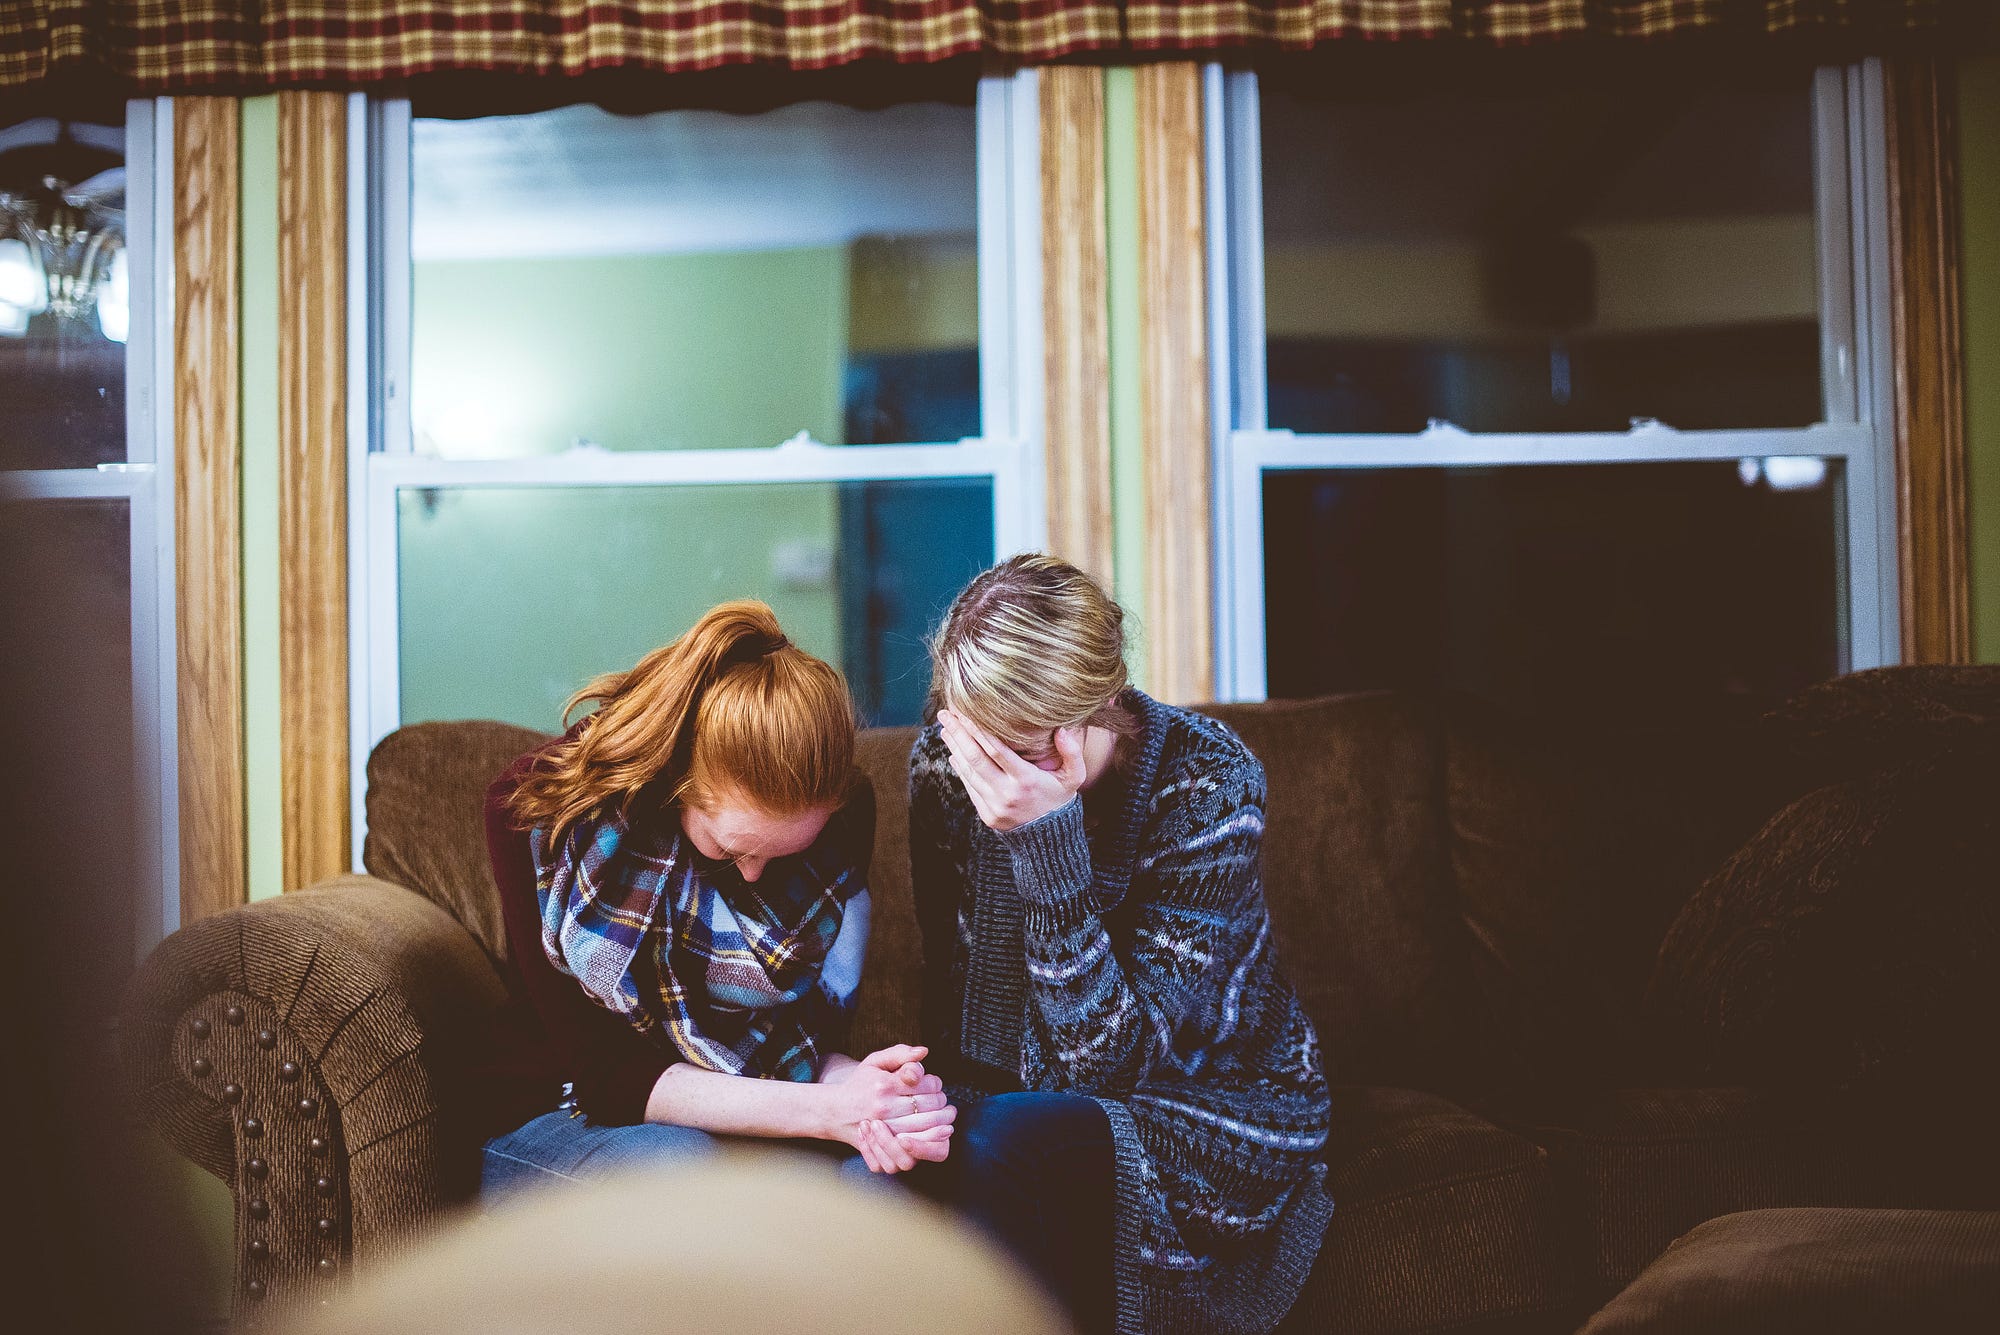 Two women sitting on a couch, crying and holding hands.